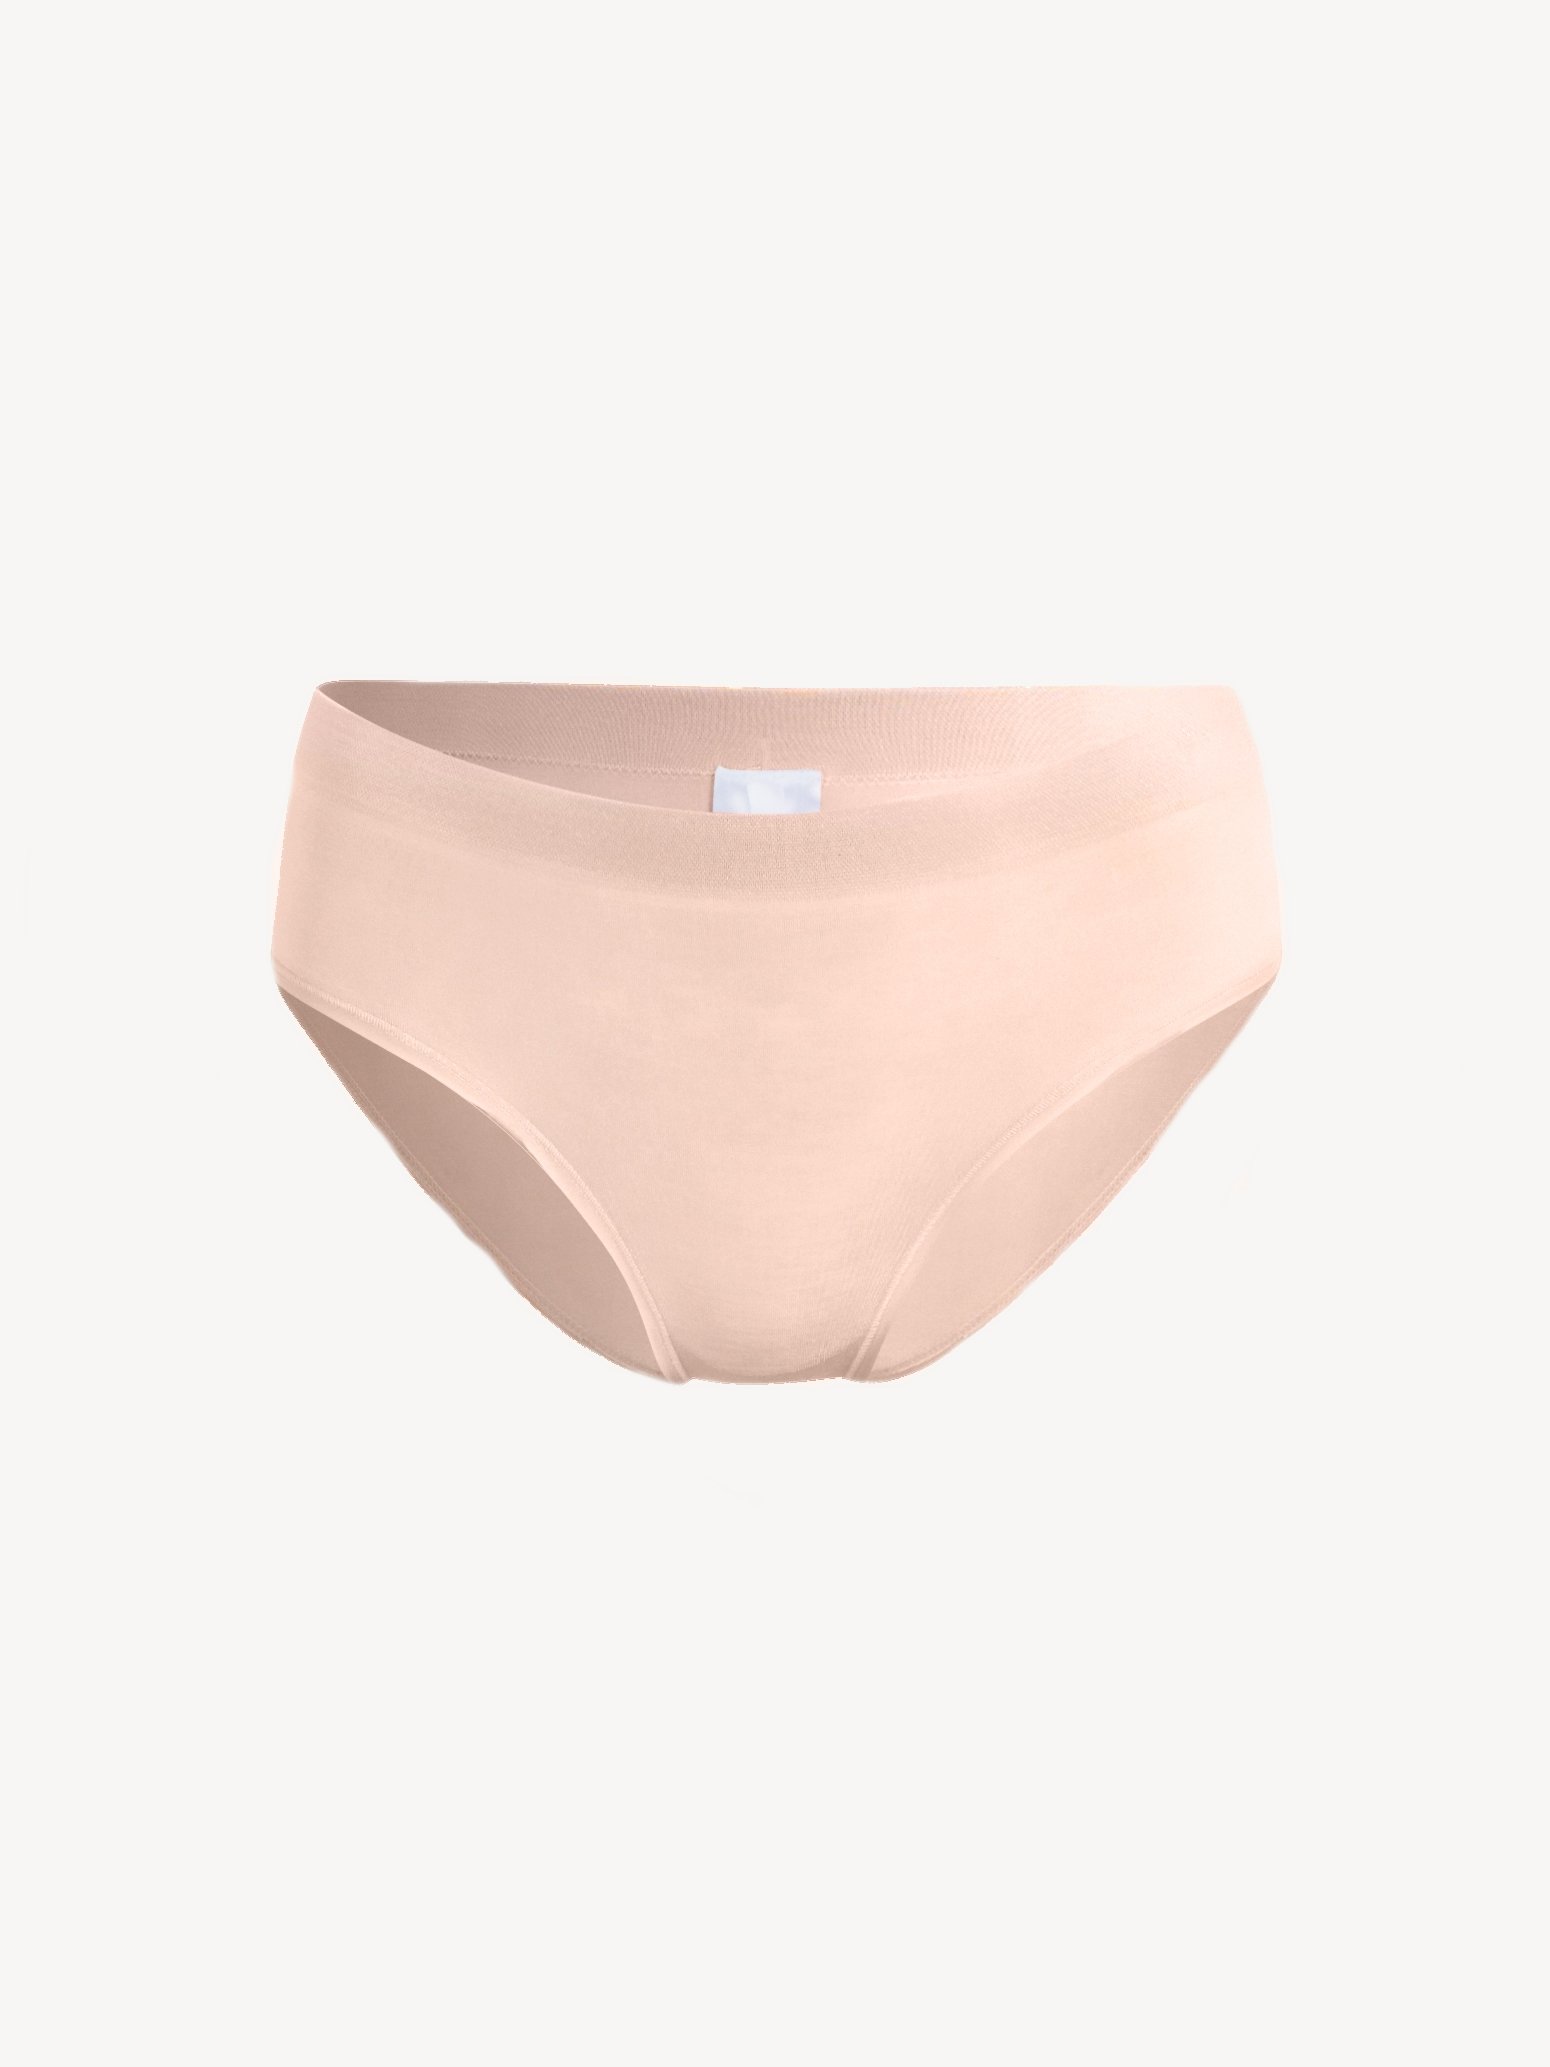 Tamaris Underwear: Discover bargains and offers in the Tamaris shop now!